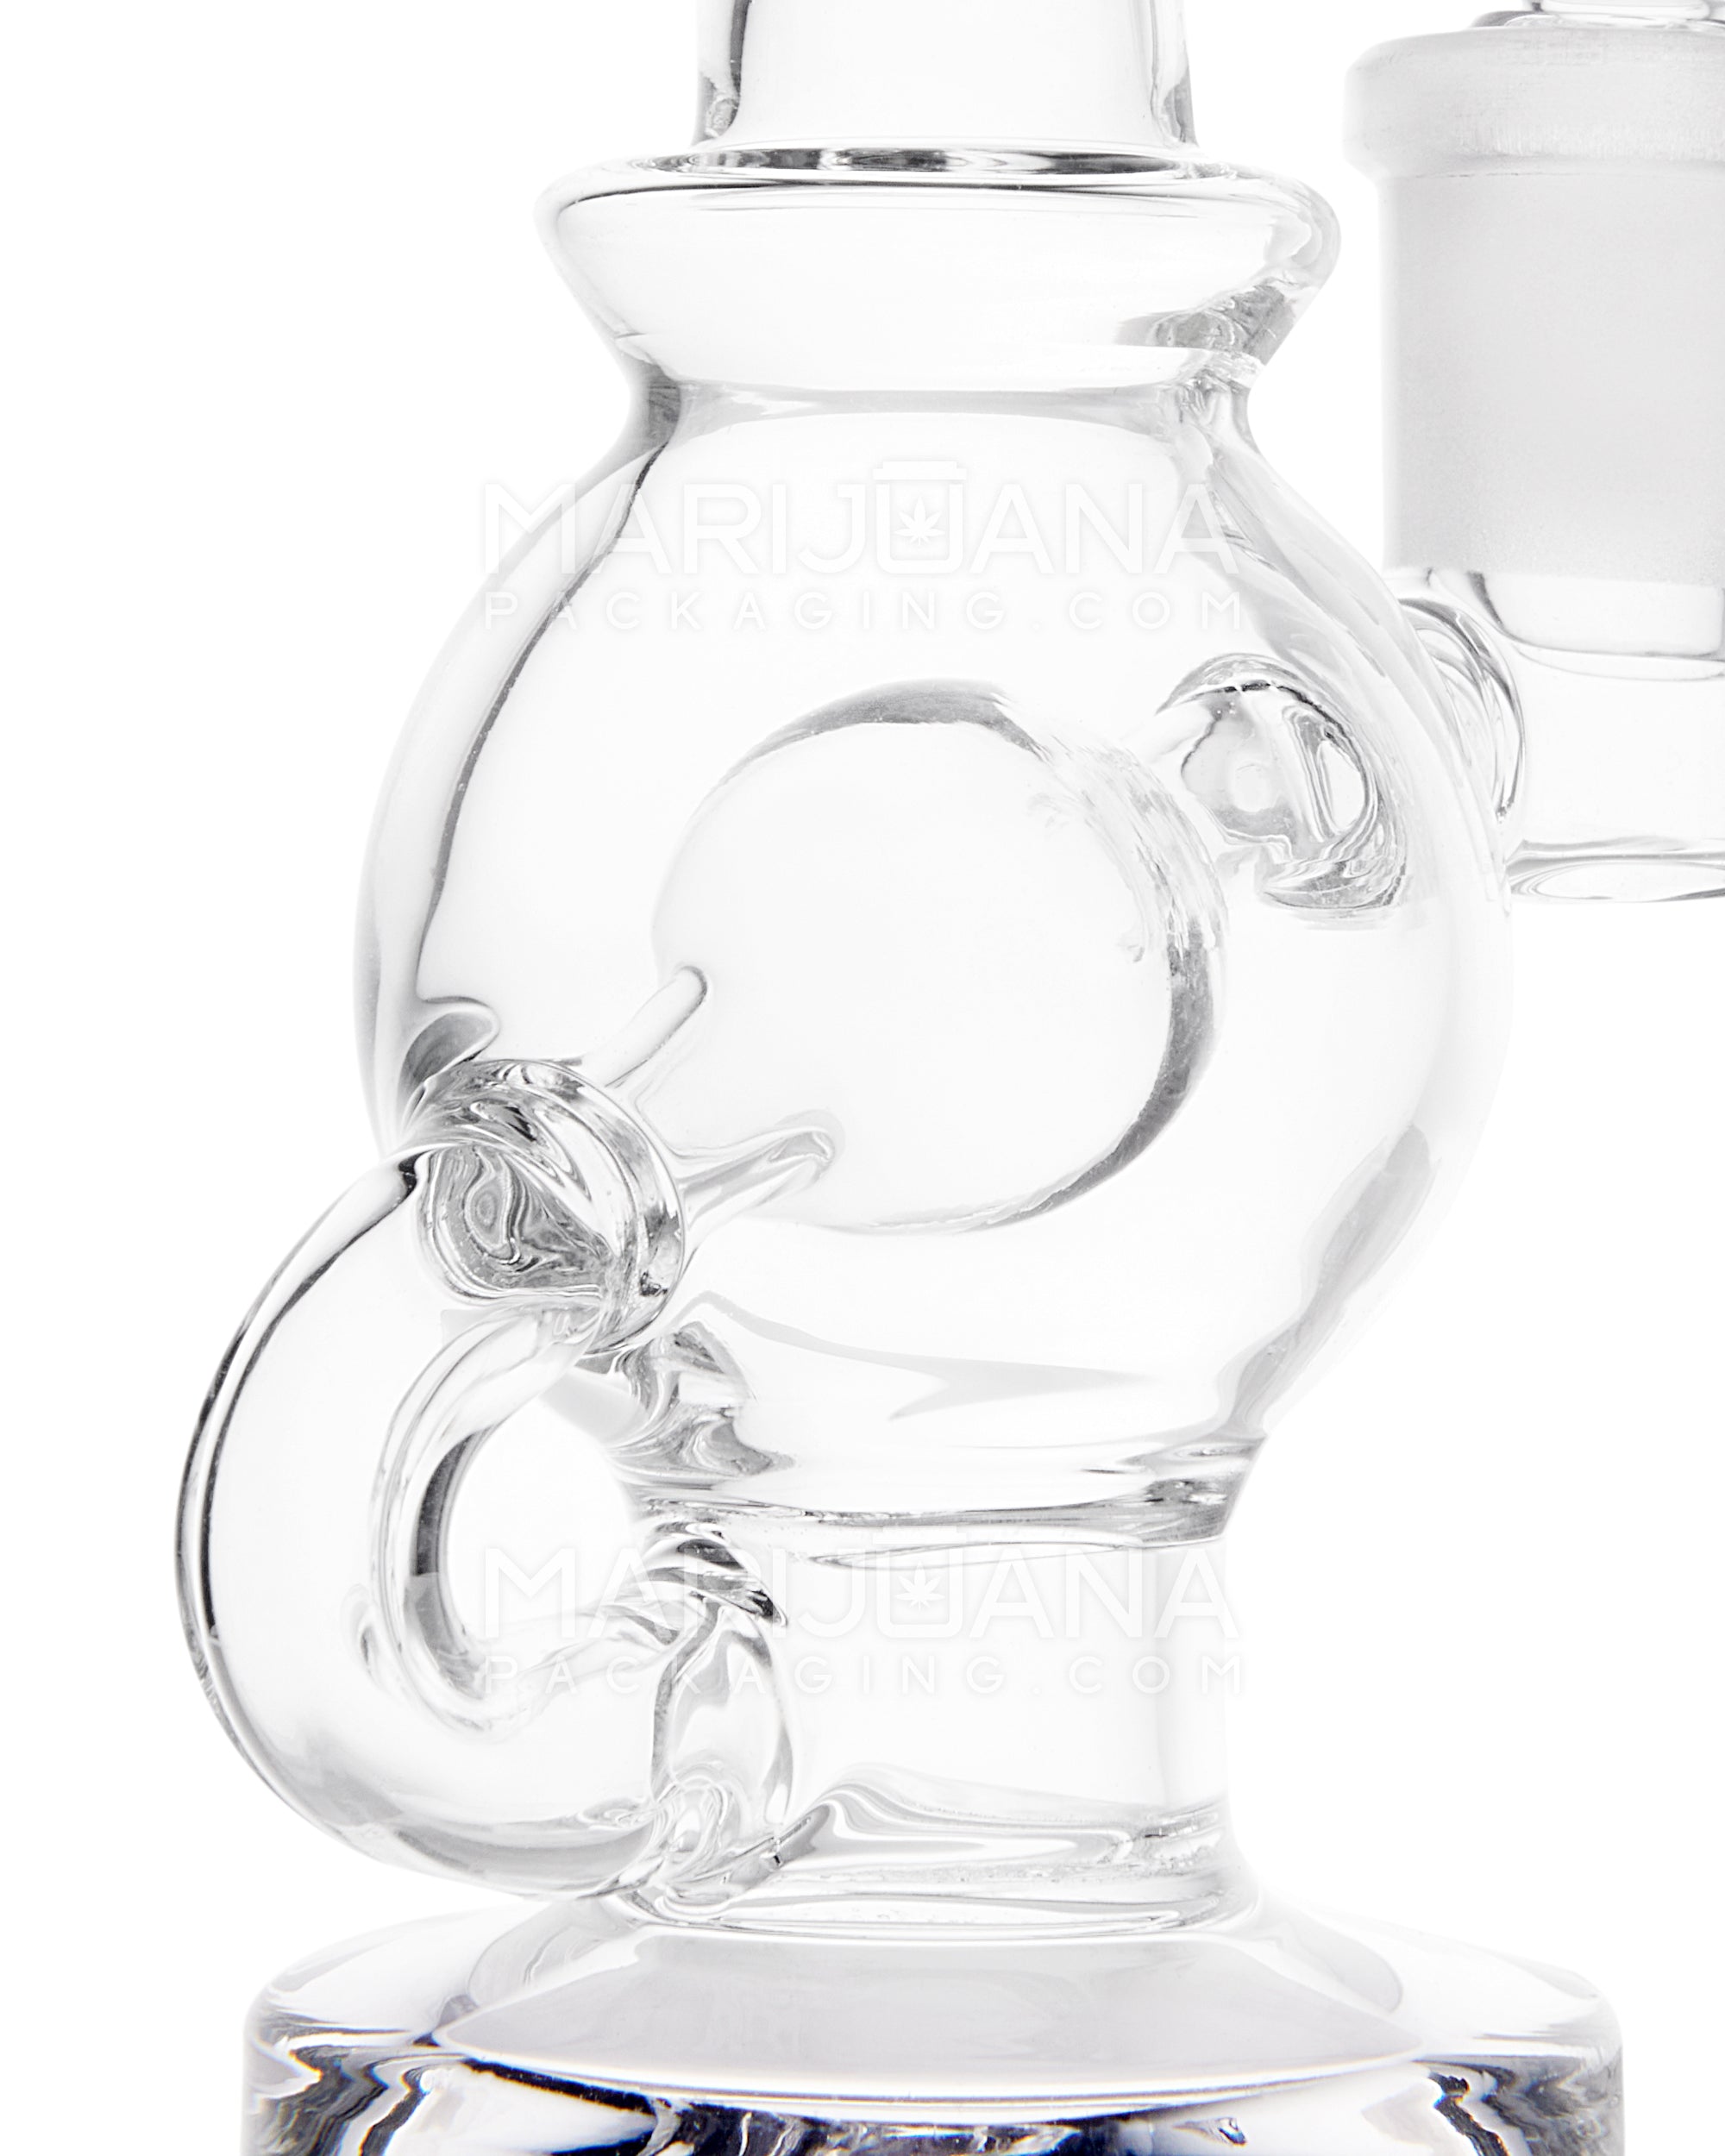 USA Glass | Bent Neck Mini Ball Glass Dab Rig | 4.25in Tall - 14mm Banger - Clear